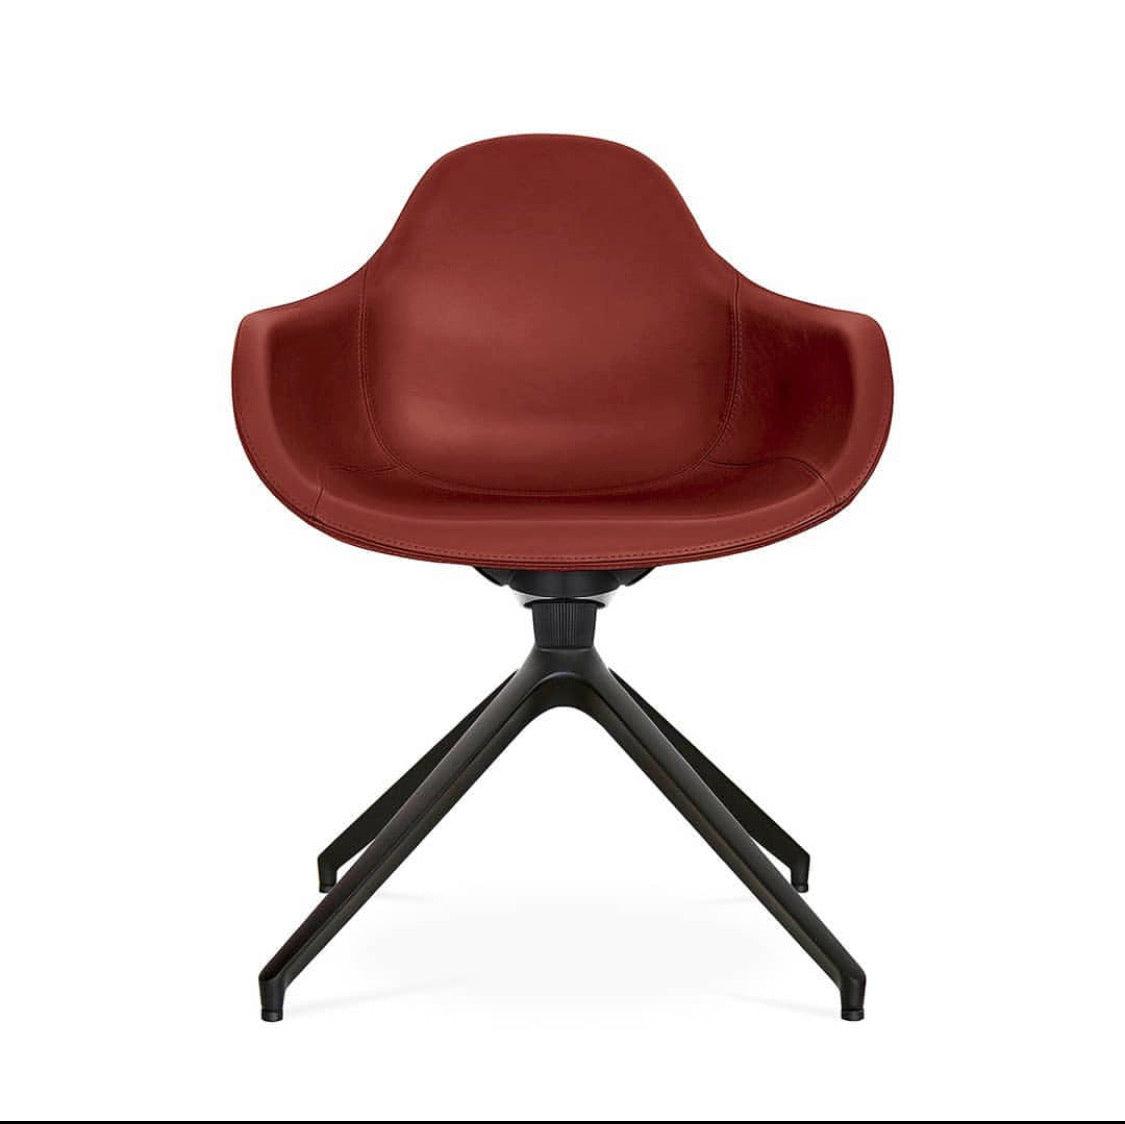 Epoque Armchair c/w Spider Base-Job's-Contract Furniture Store